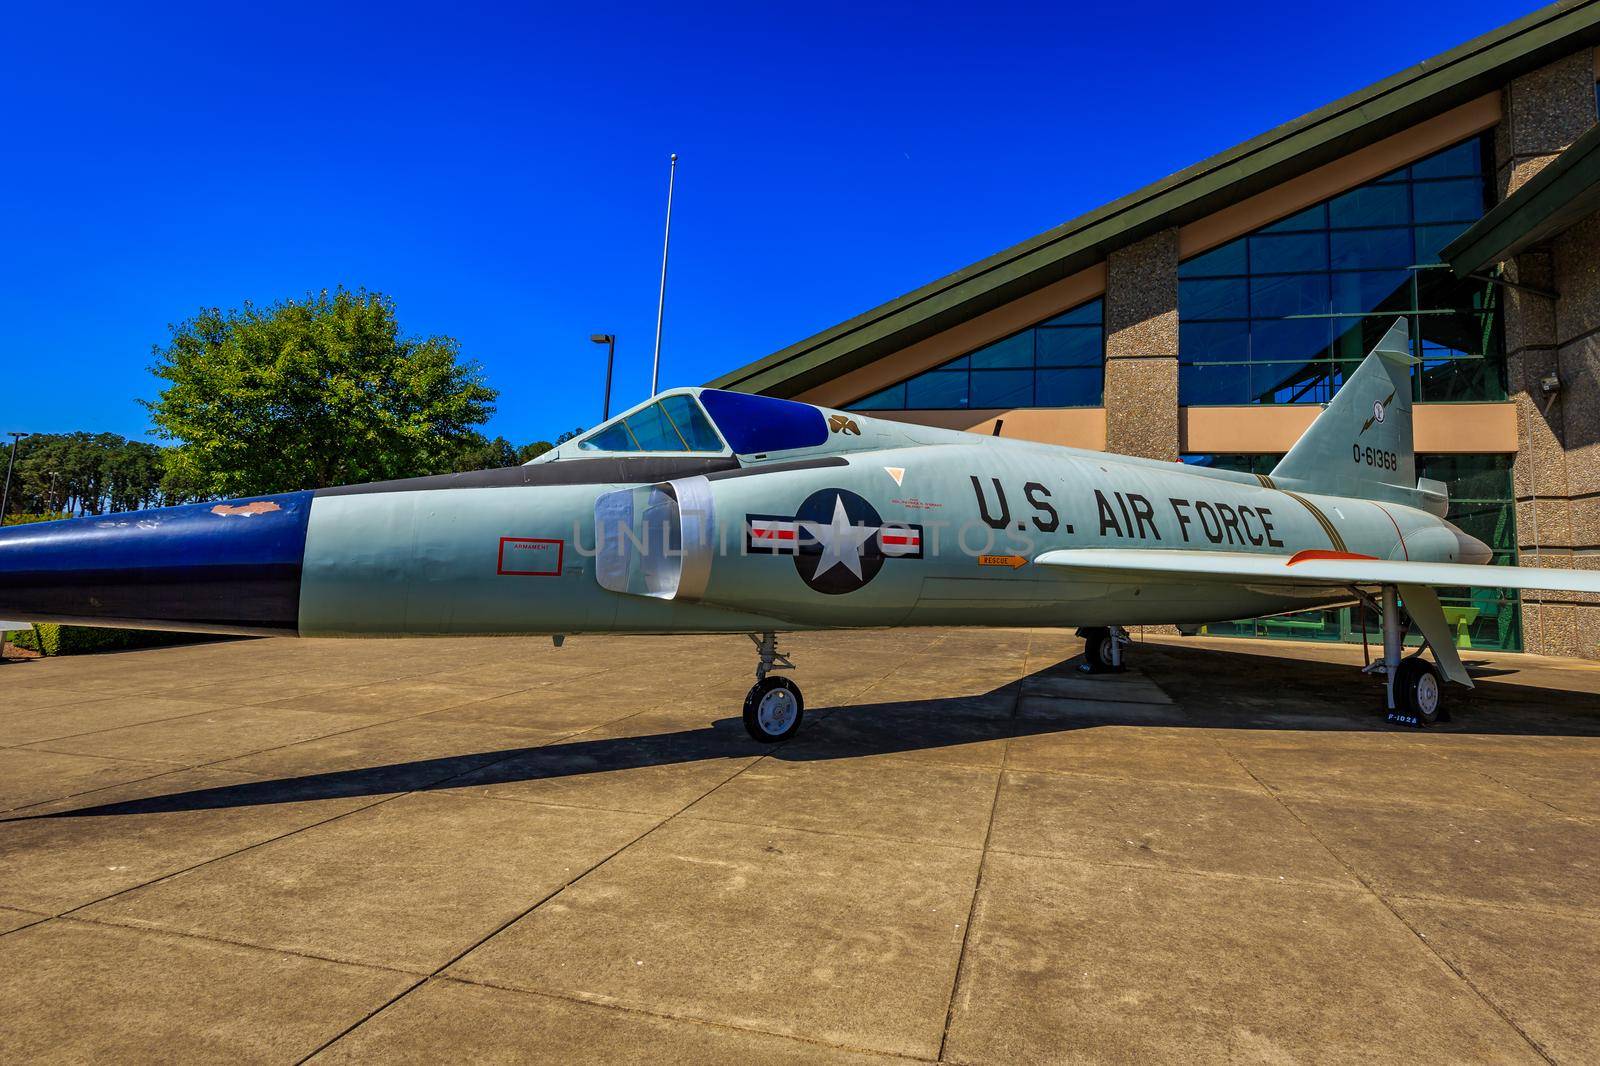 McMinnville, Oregon - August 21, 2017: US Air Force Convair F-102A Delta Dagger on exhibition at Evergreen Aviation & Space Museum.